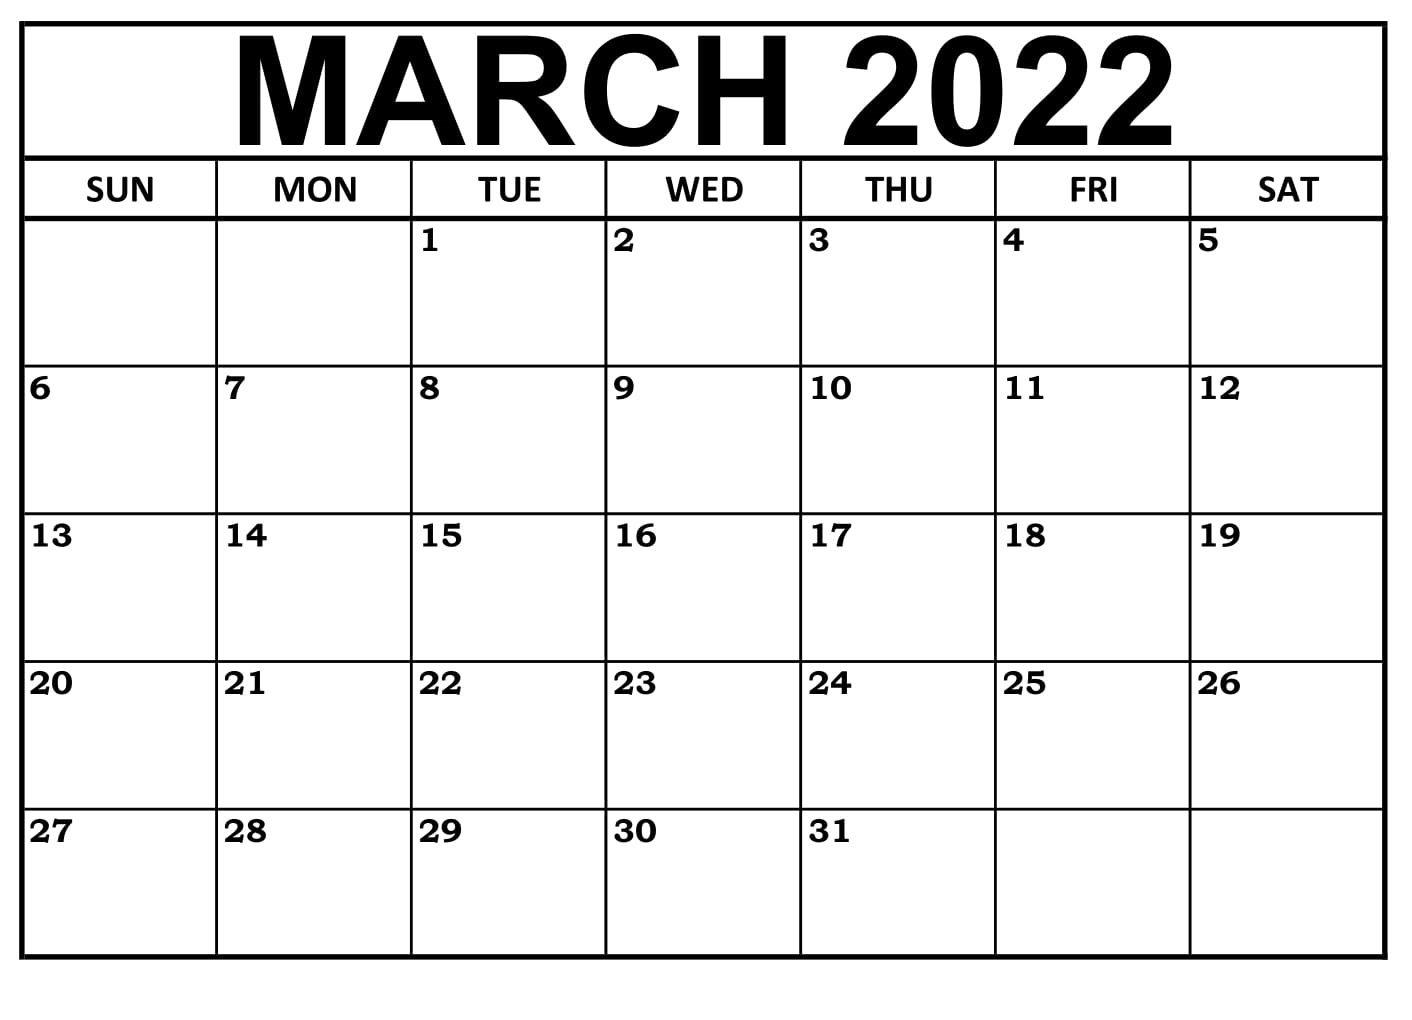 March 2022 Calendar With Holidays Template - Printable